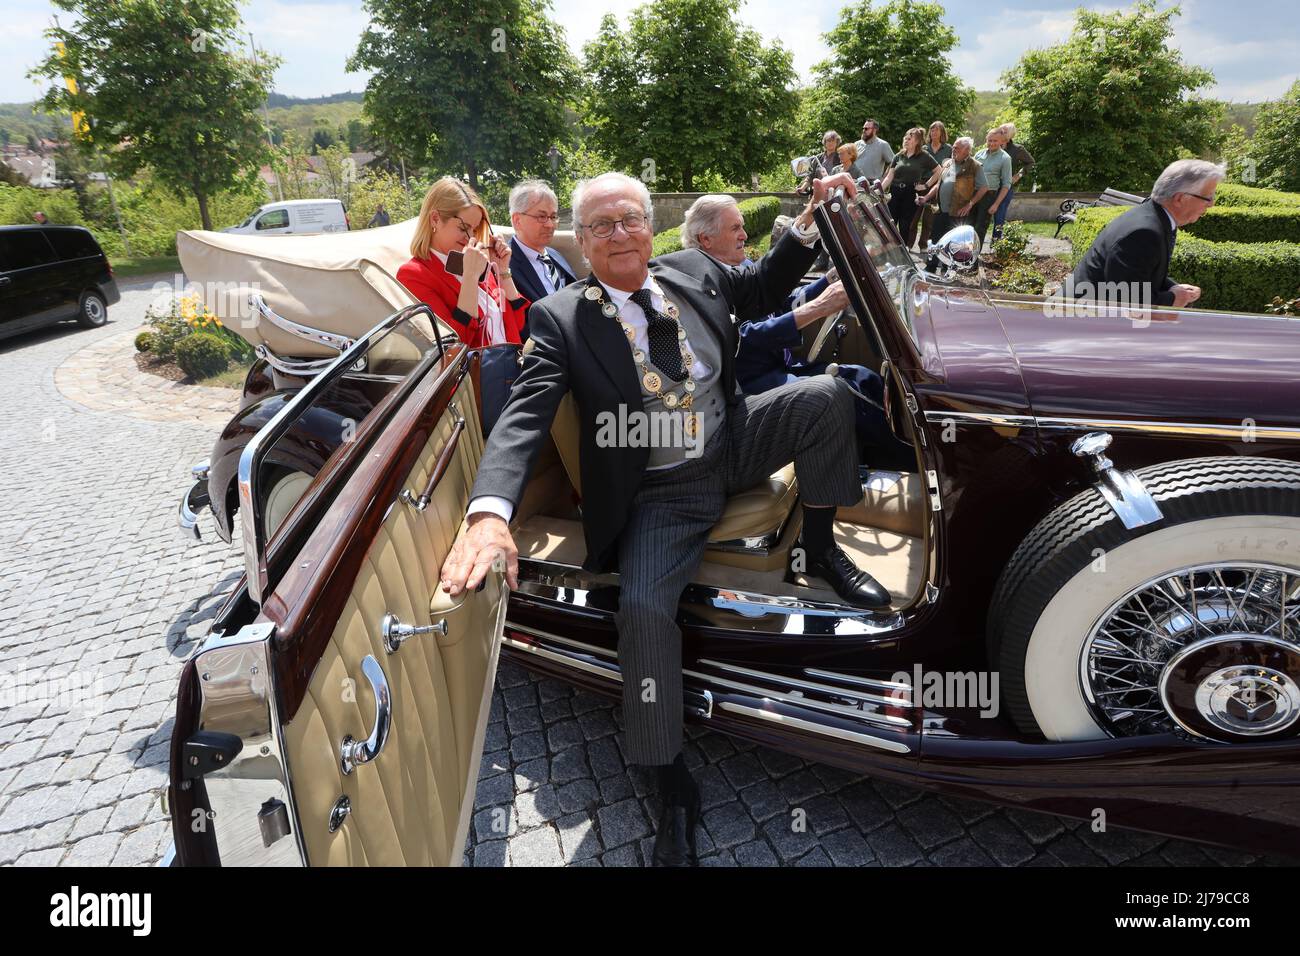 07 May 2022, Saxony-Anhalt, Ballenstedt: Eduard Prince von Anhalt drives up in a vehicle. He celebrates his 80th birthday in Ballenstedt. At the same time the investiture took place. In the context of the Investitur annually persons for special achievements of the Askanischen house order "Albrecht the bear" are honored. The investiture takes place in the presence of Eduard Prince of Anhalt. Photo: Matthias Bein/dpa-Zentralbild/ZB Stock Photo